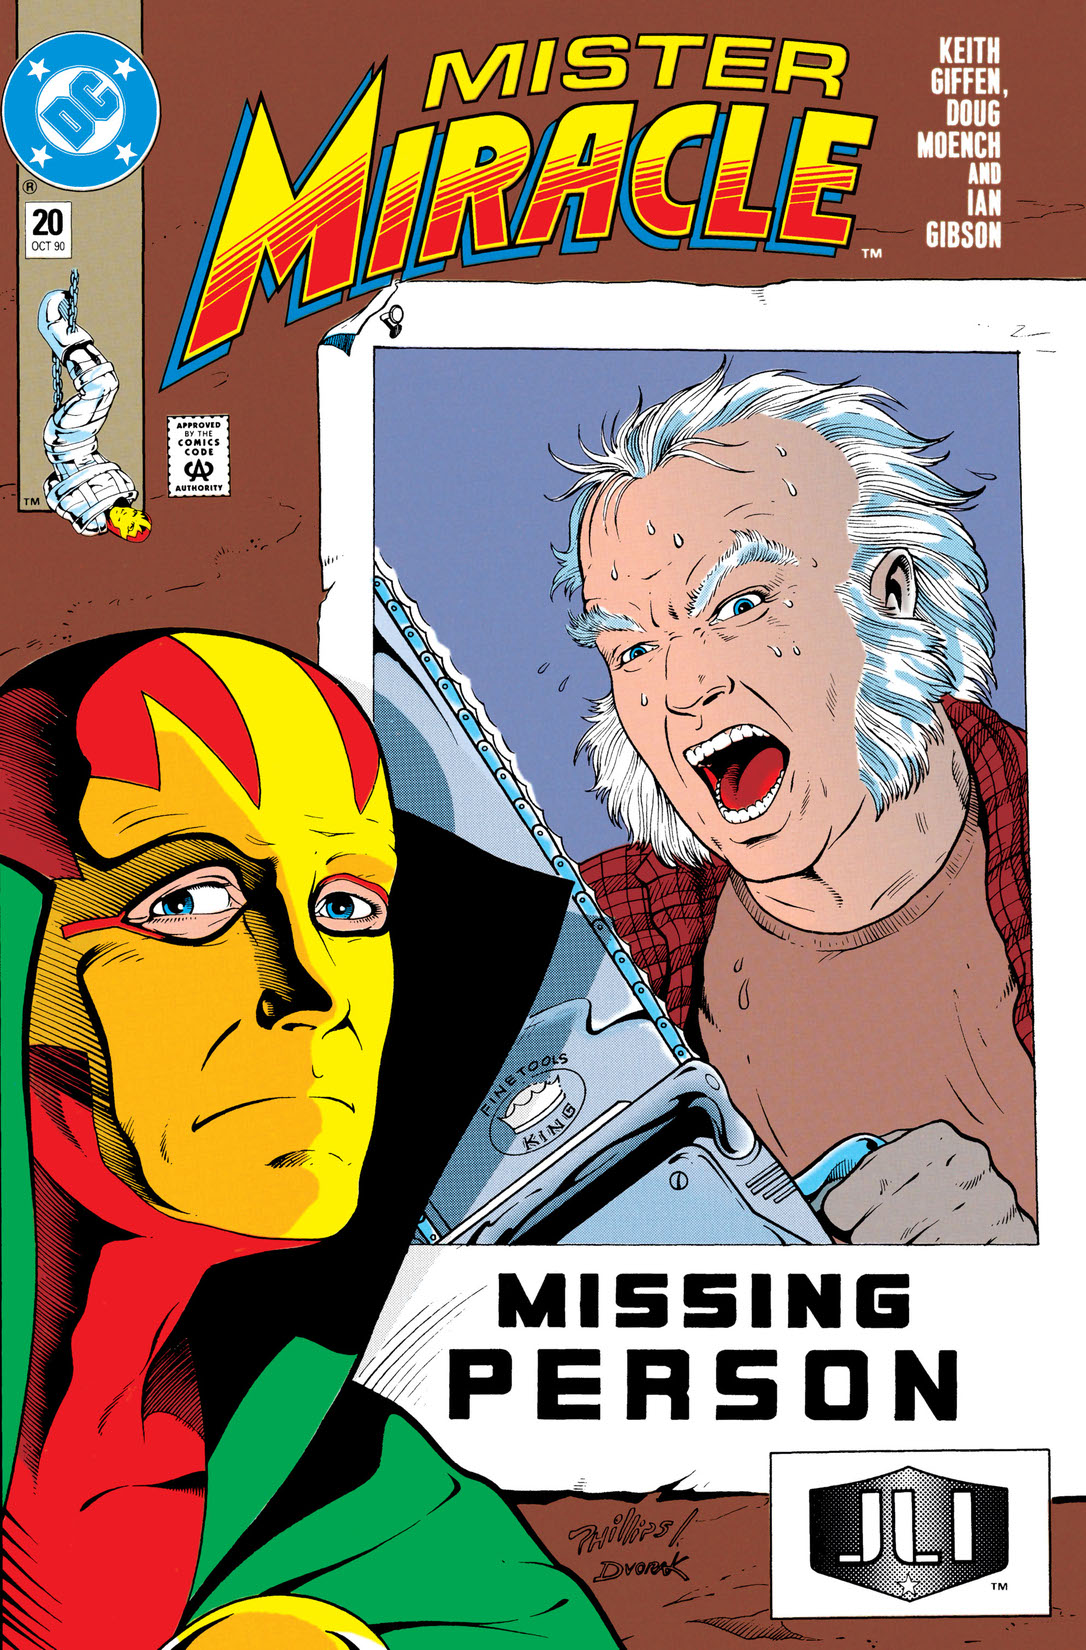 Mister Miracle (1988-) #20 preview images